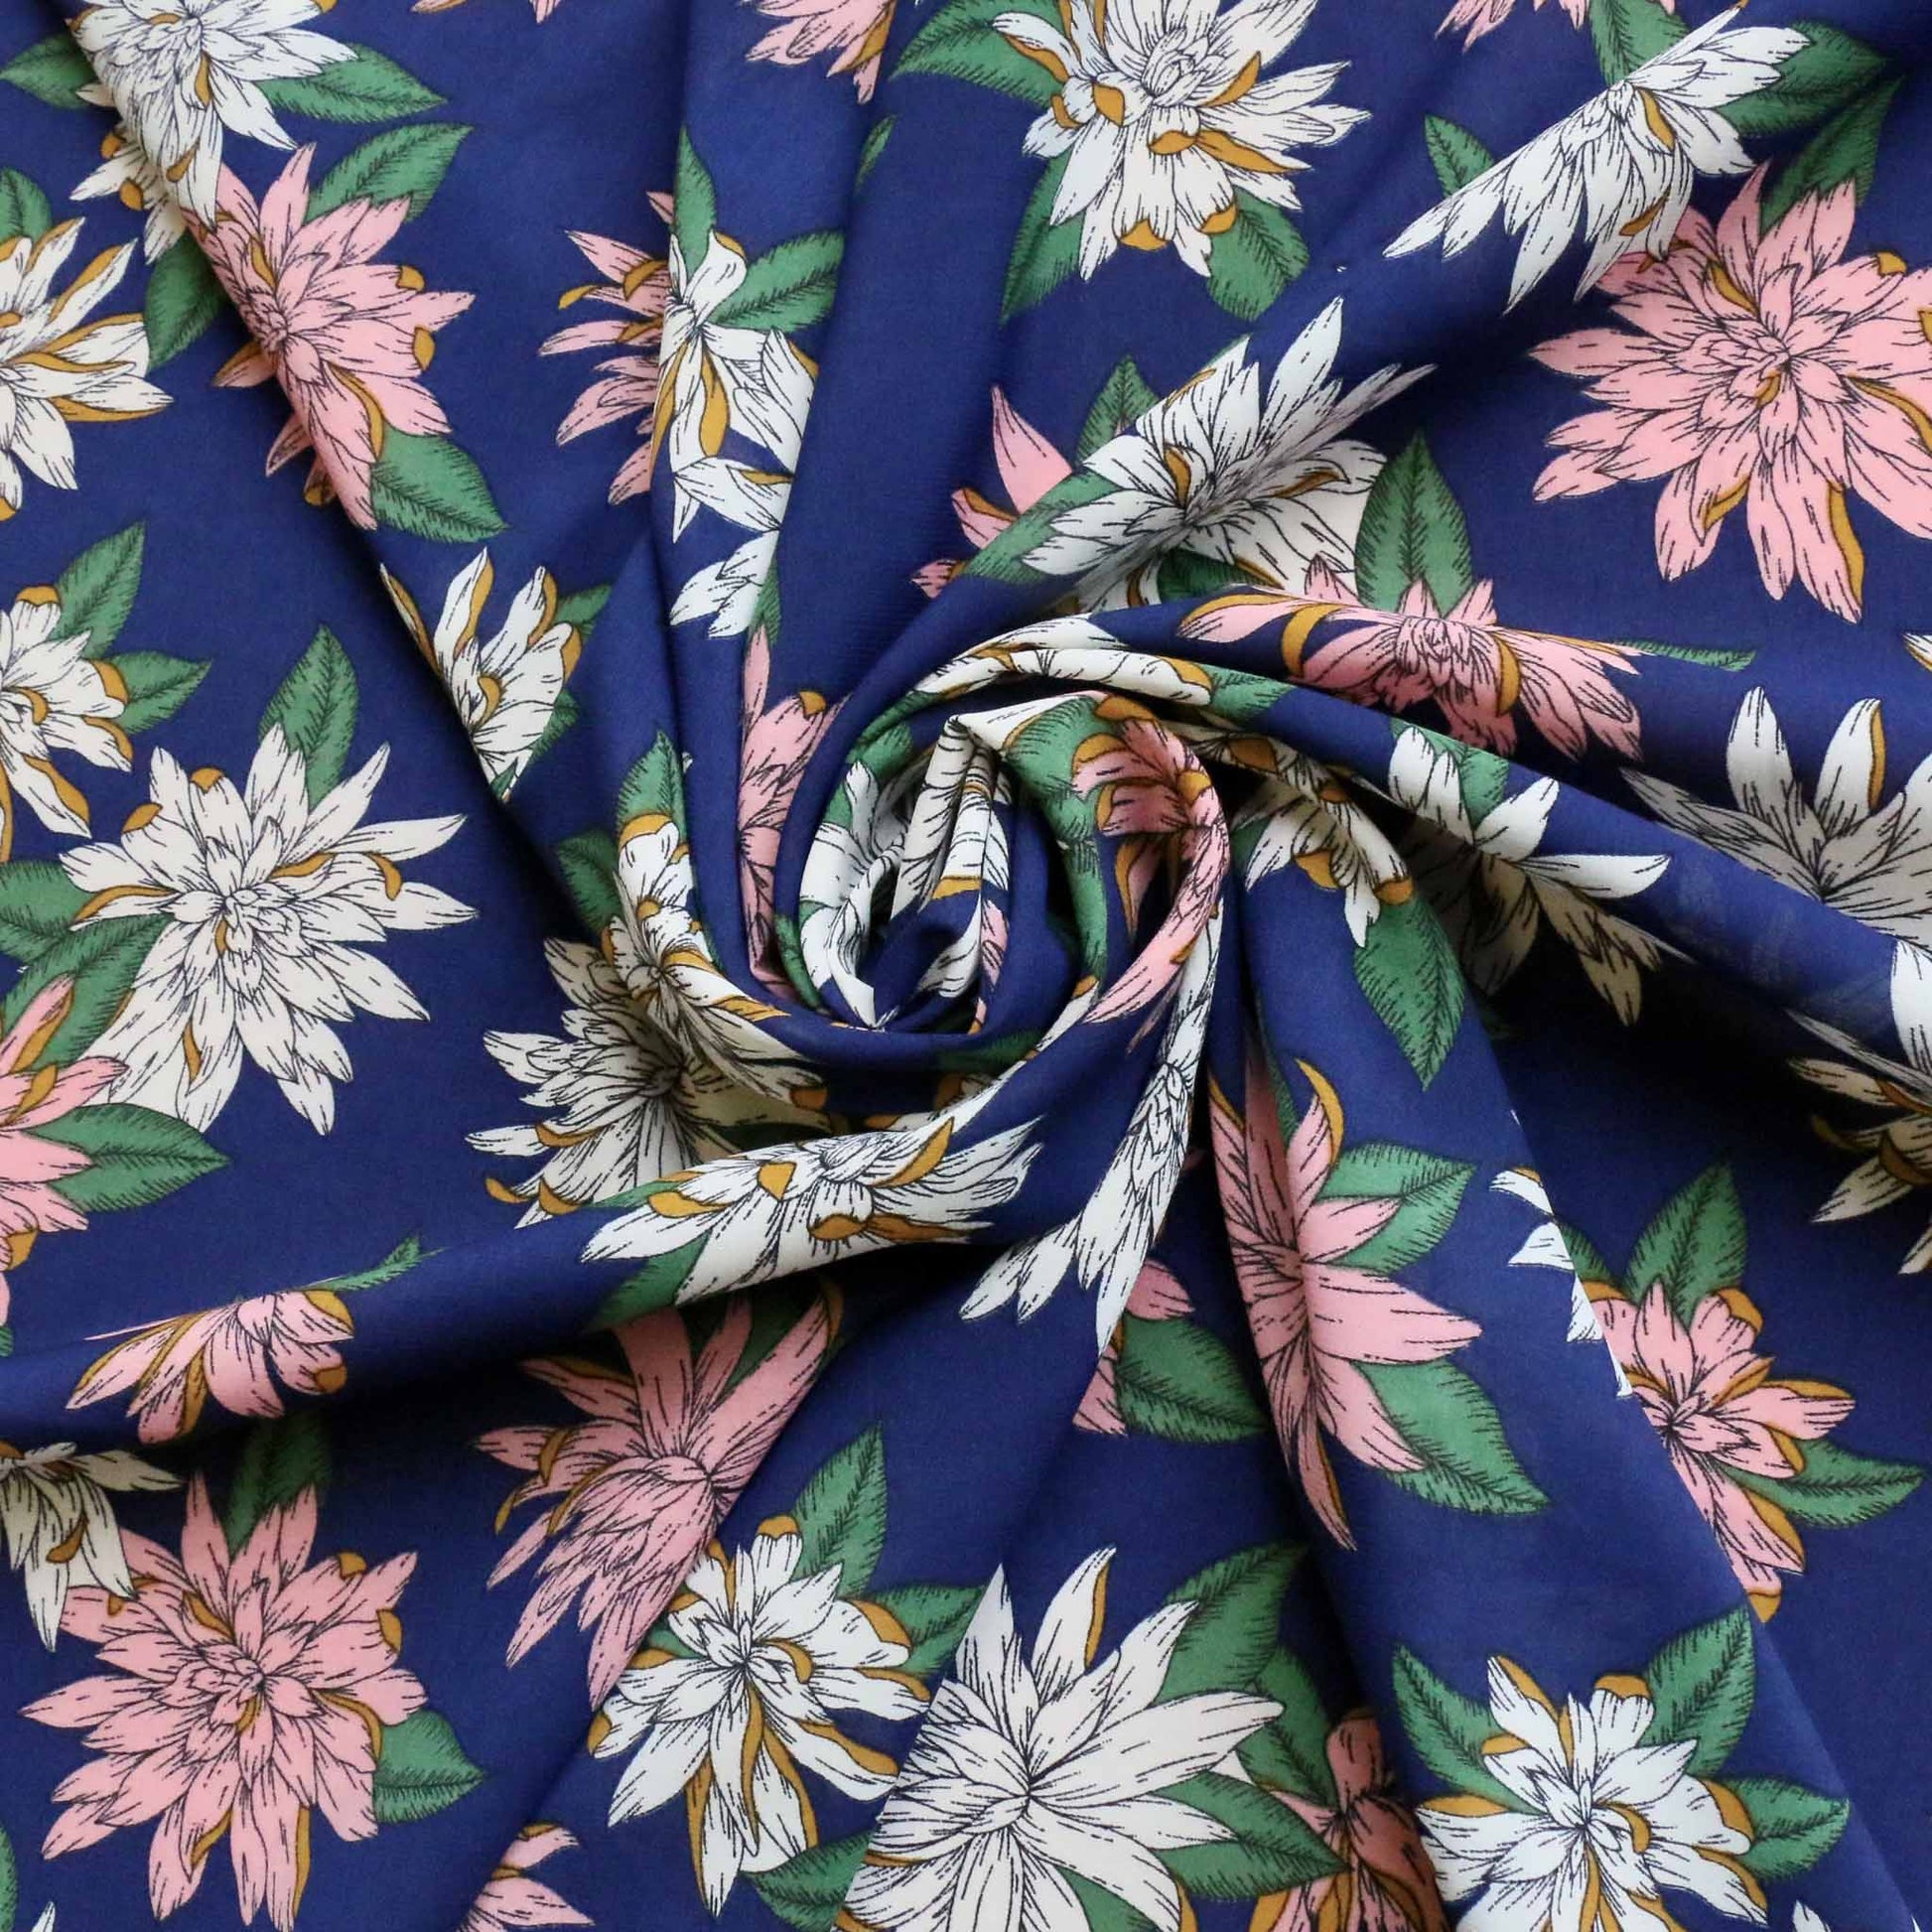 pink white and blue polyester chiffon stretchy dressmaking fabric with large floral print